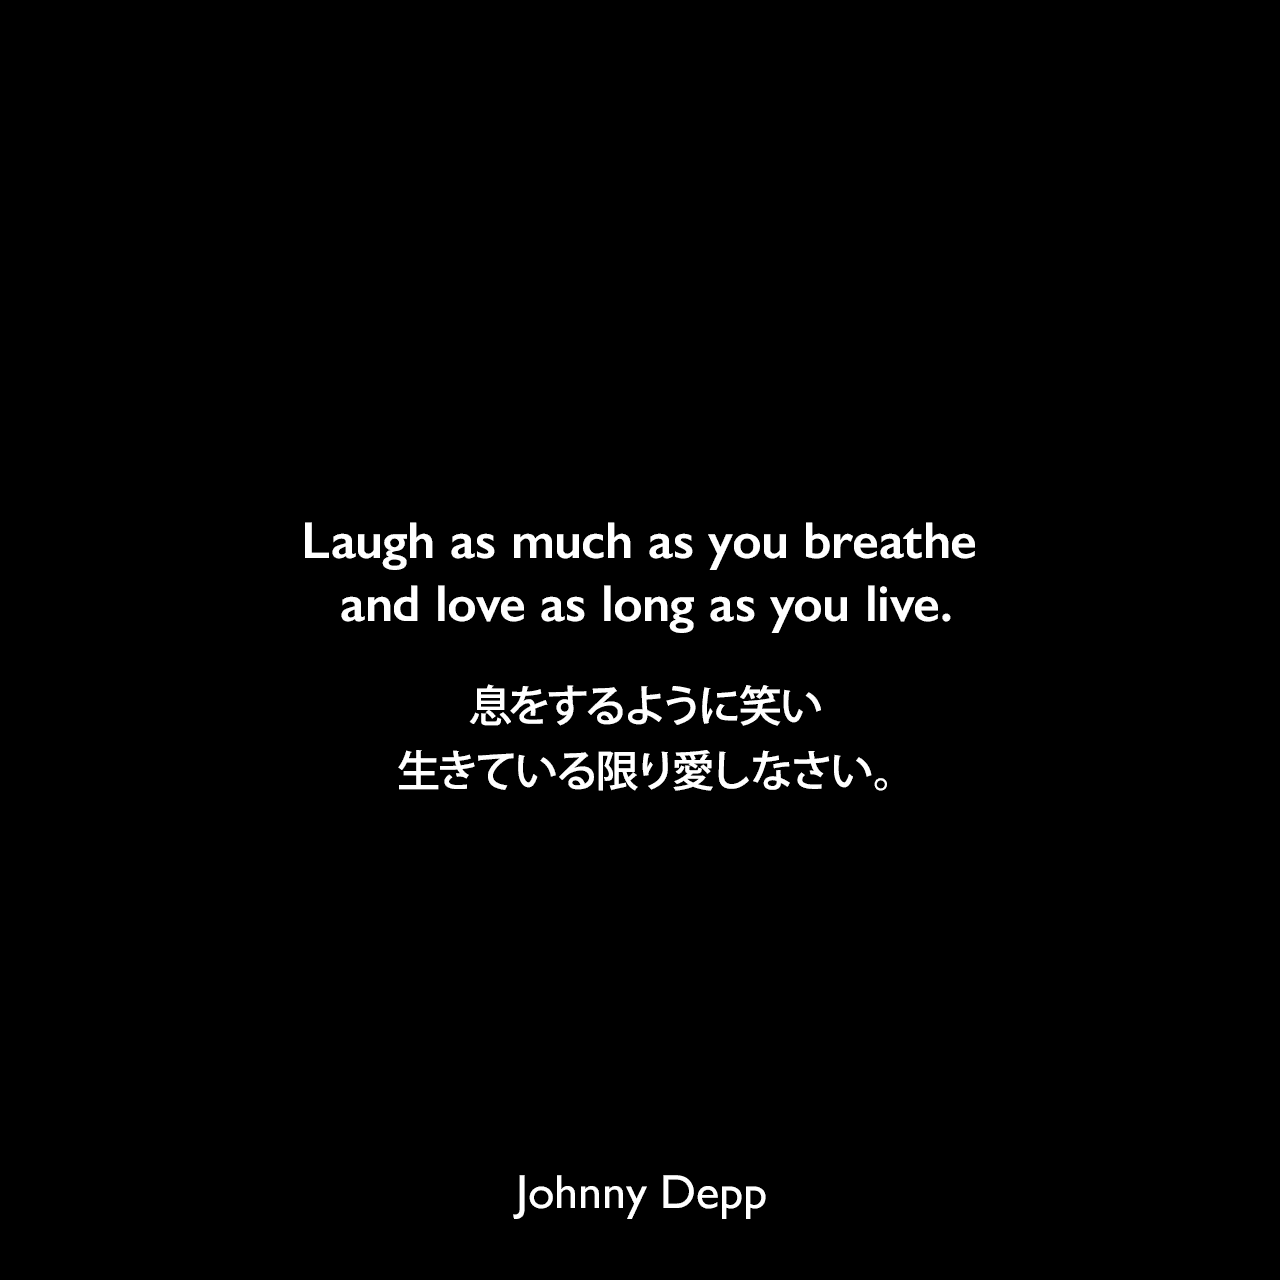 Laugh as much as you breathe and love as long as you live.息をするように笑い、生きている限り愛しなさい。Johnny Depp